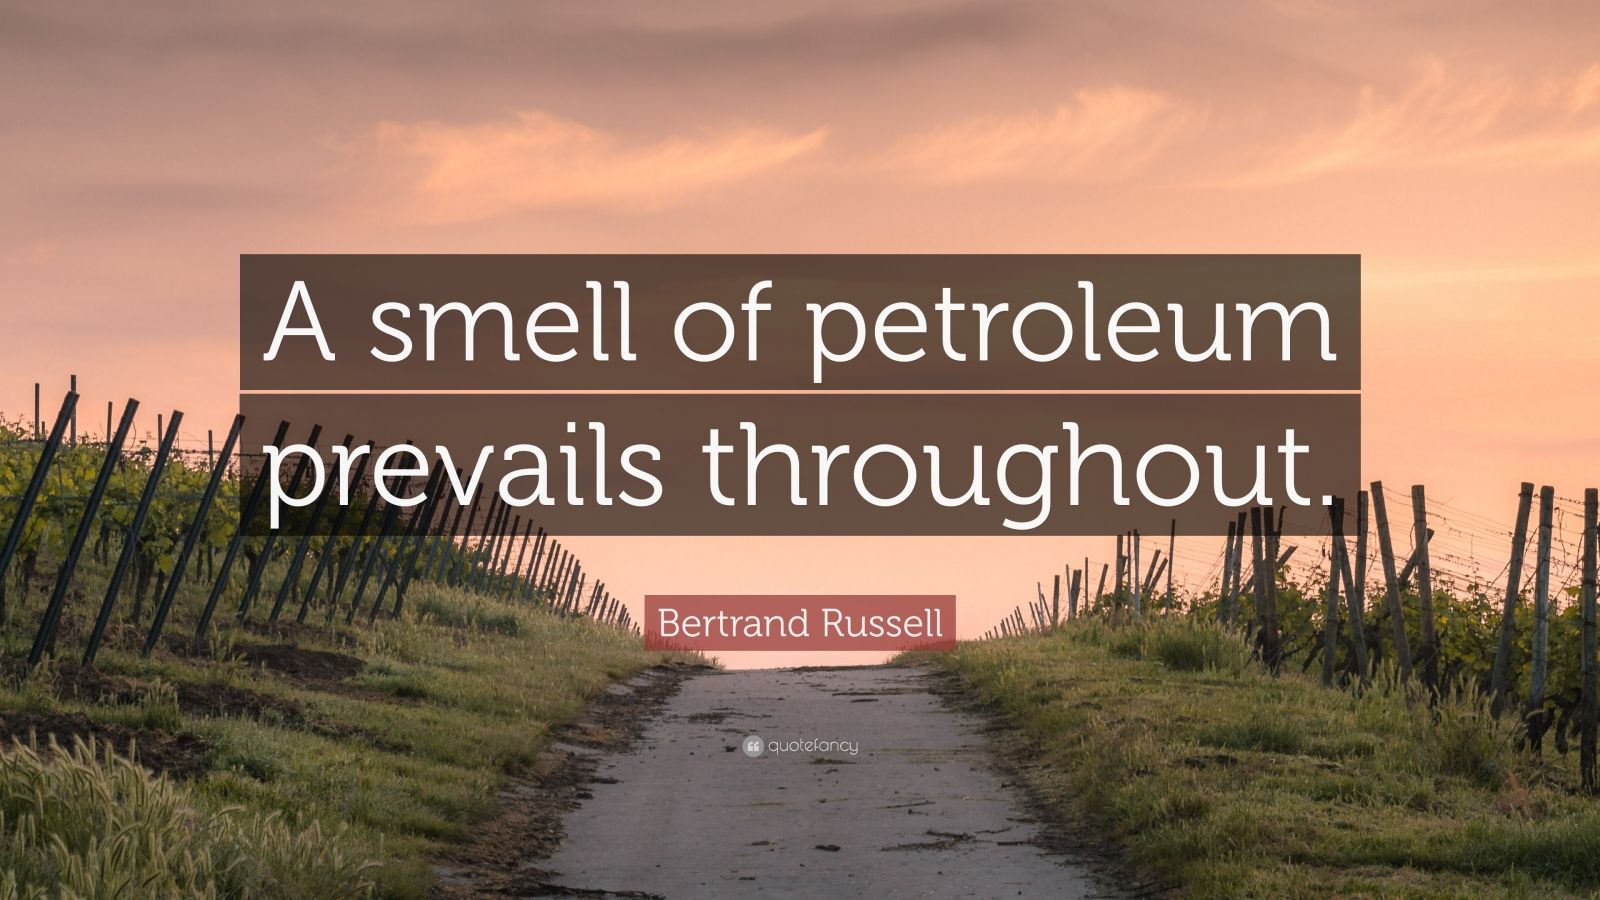 bertrand russell quote: "a smell of petroleum prevails through